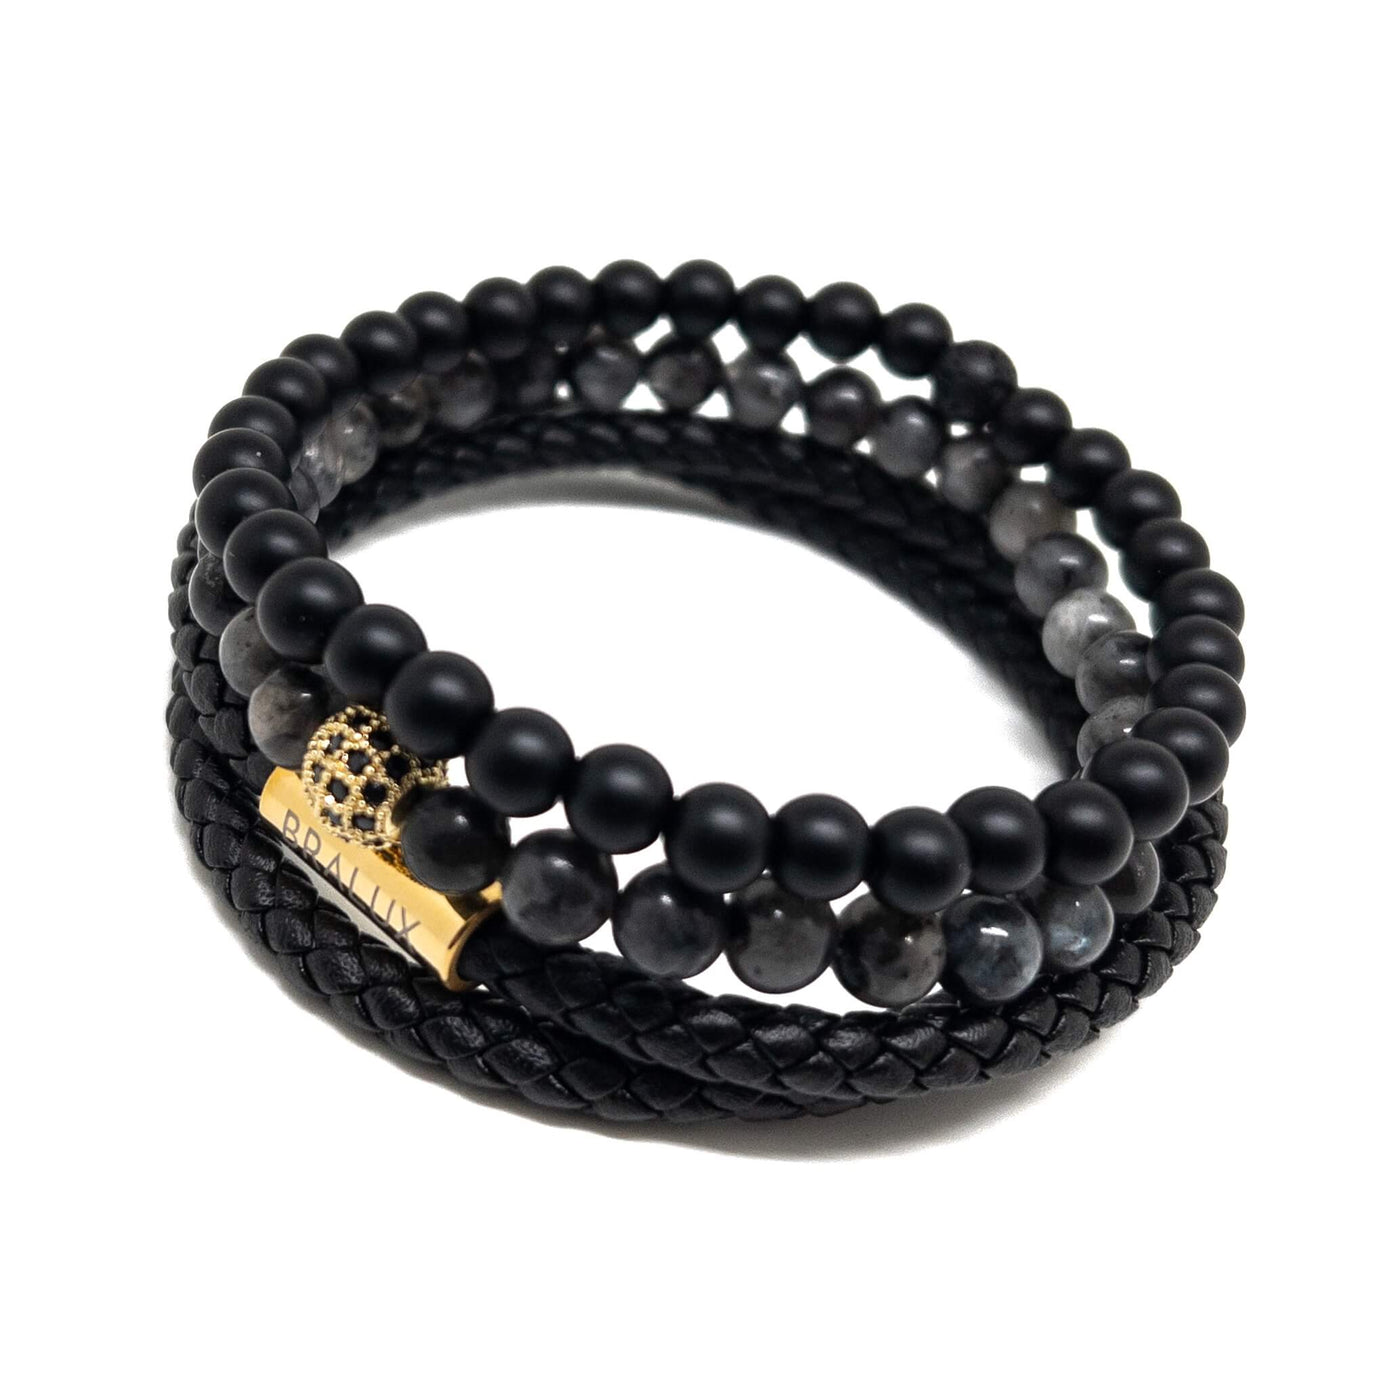 The Gold Plated Duo Black Leather Stack